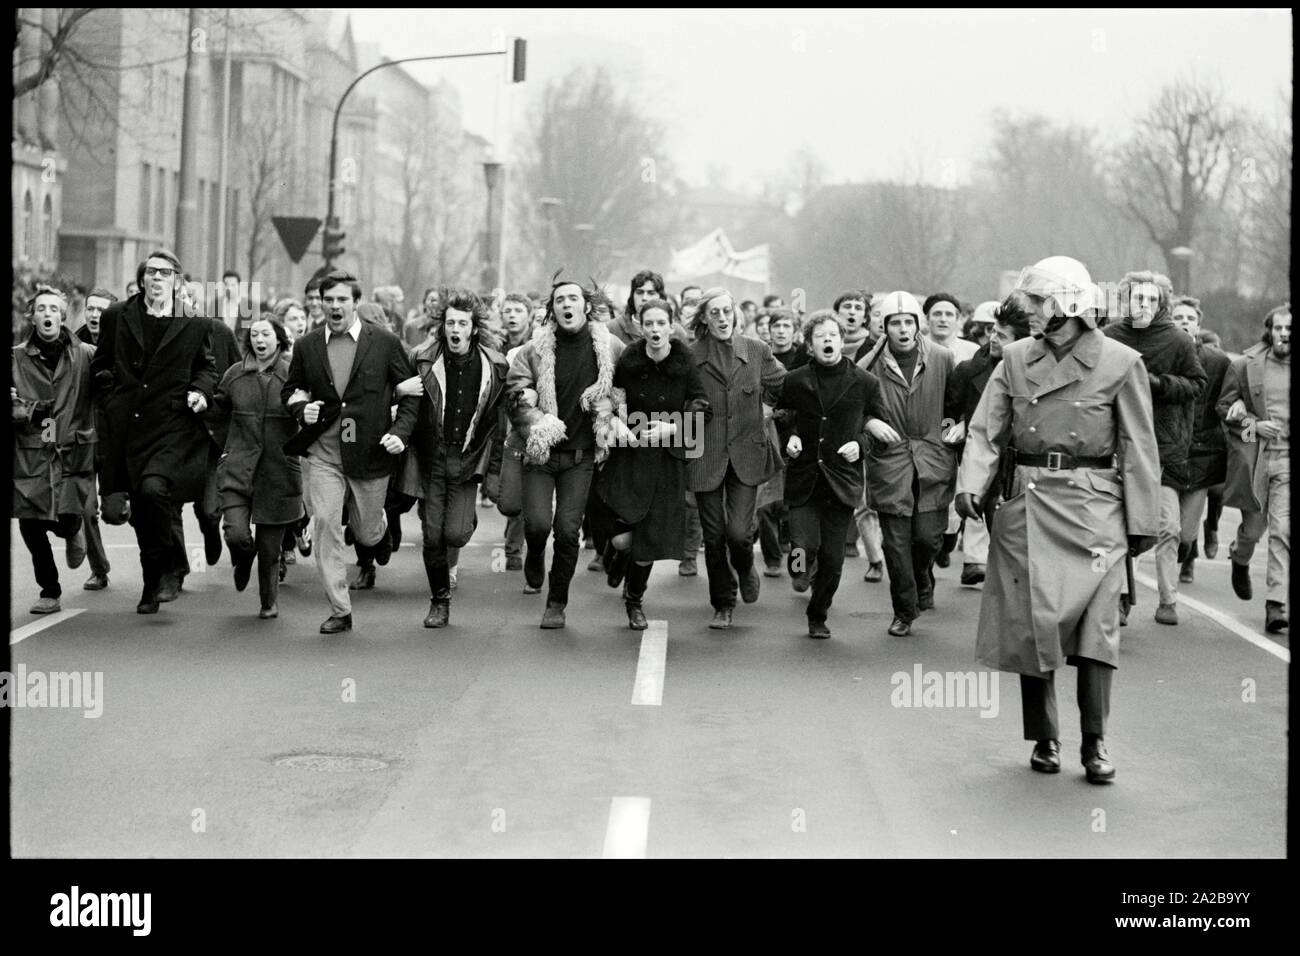 Germany. Frankfurt. 1.February 1969. About 1000 students of the University of Frankfurt rallying against the state of emergency in Spain.  Copyright Notice: Max Scheler/SZ Photo. Stock Photo